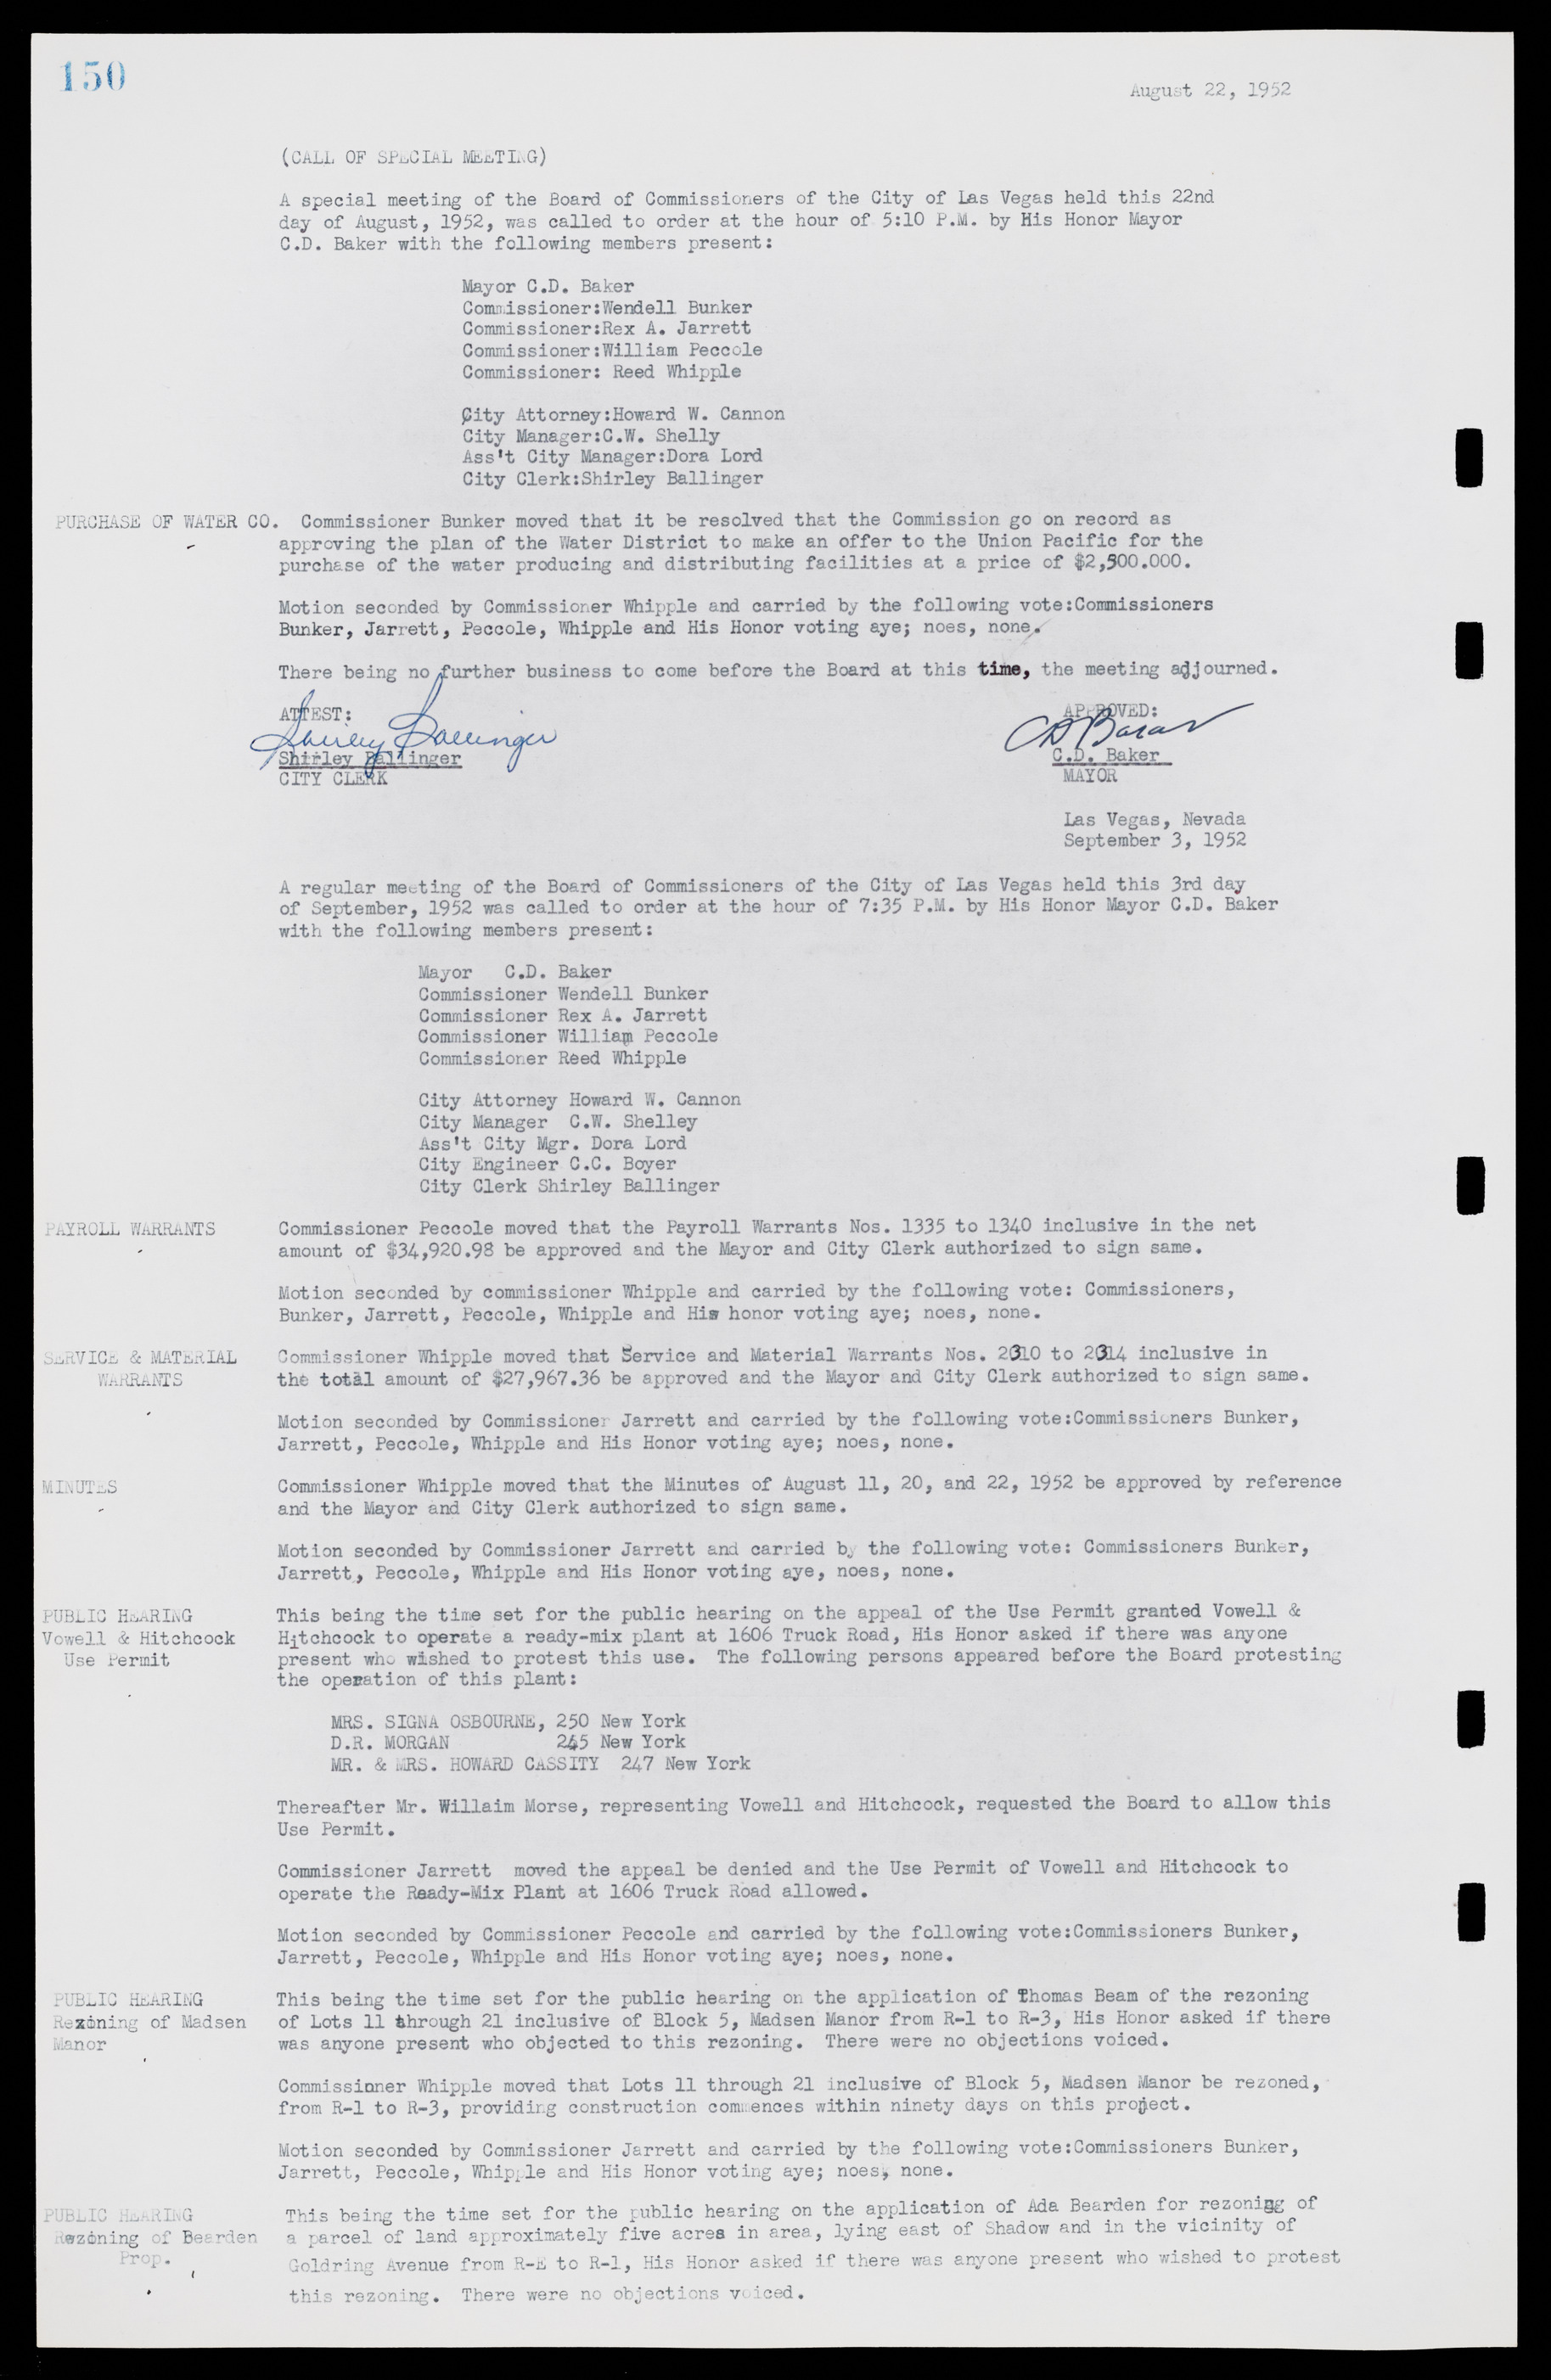 Las Vegas City Commission Minutes, May 26, 1952 to February 17, 1954, lvc000008-164